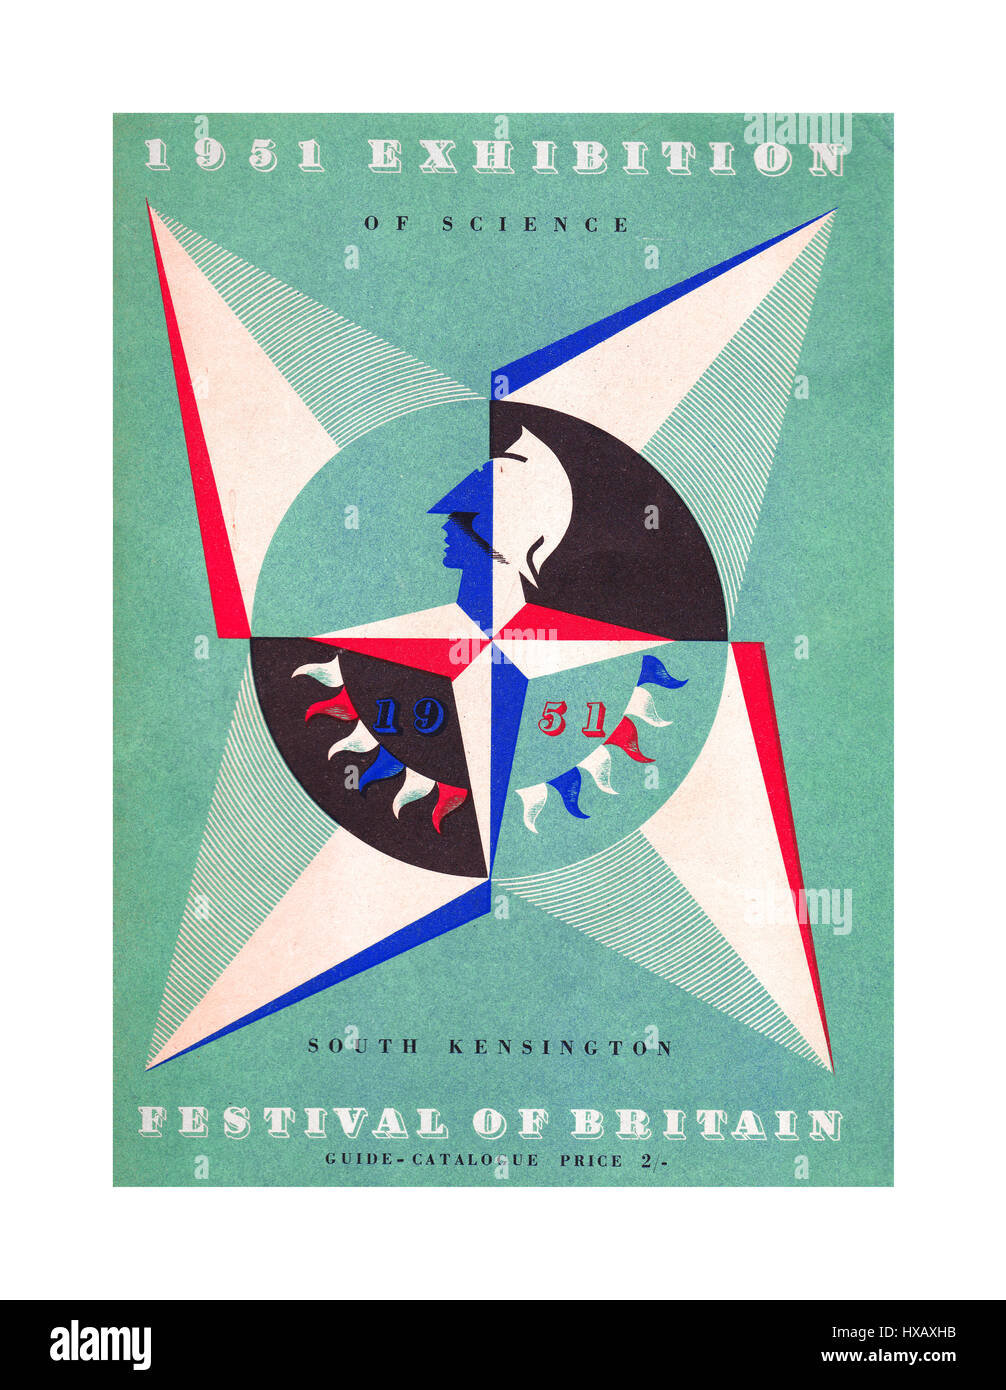 1951 Vintage poster for The Festival of Britain a national exhibition and fair that reached millions of visitors throughout the United Kingdom in the summer of 1951 Stock Photo